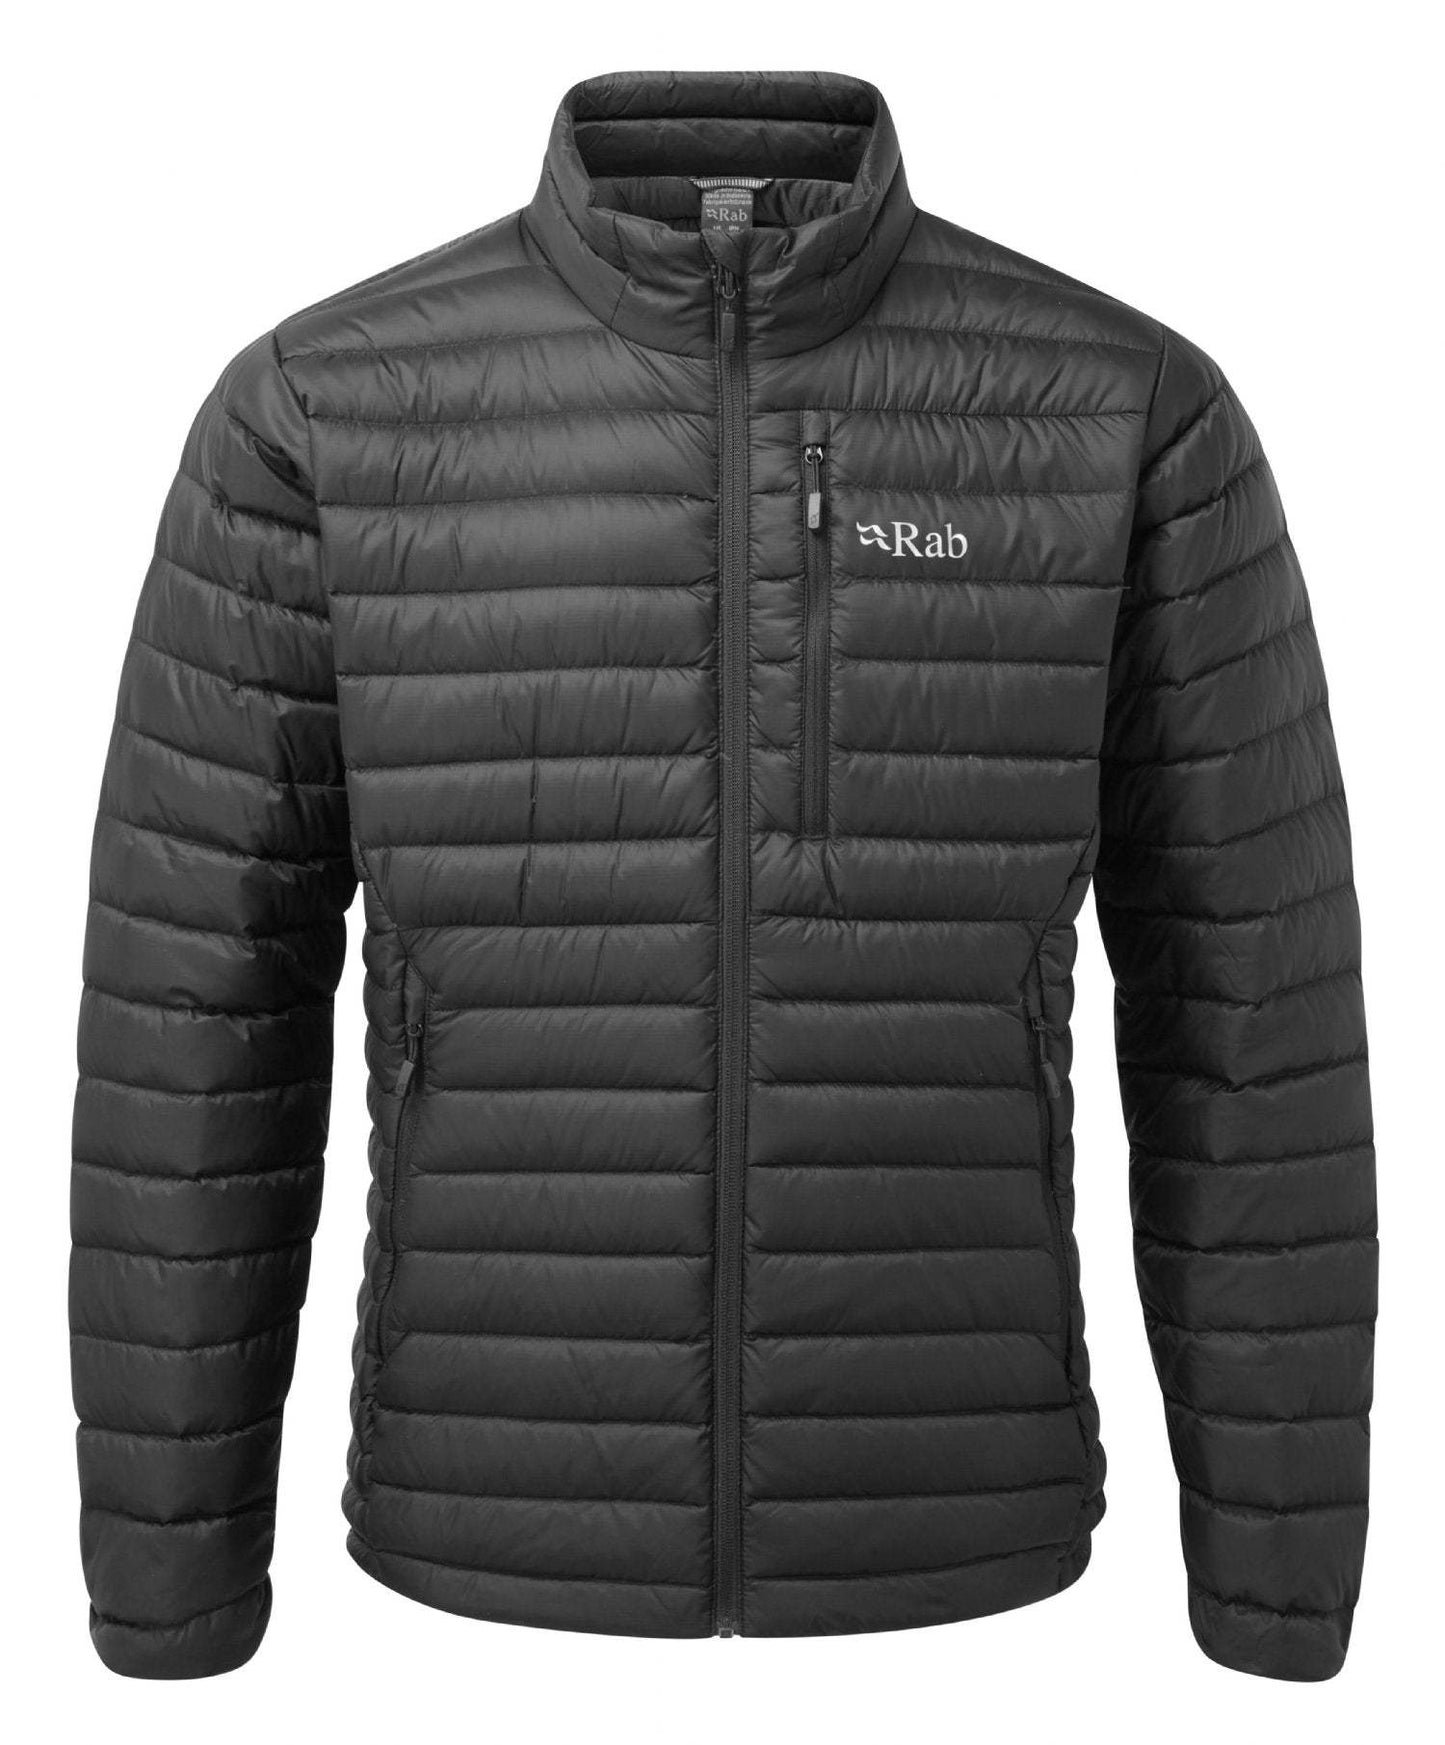 Rab Mens Microlight Jacket - The Luxury Promotional Gifts Company Limited